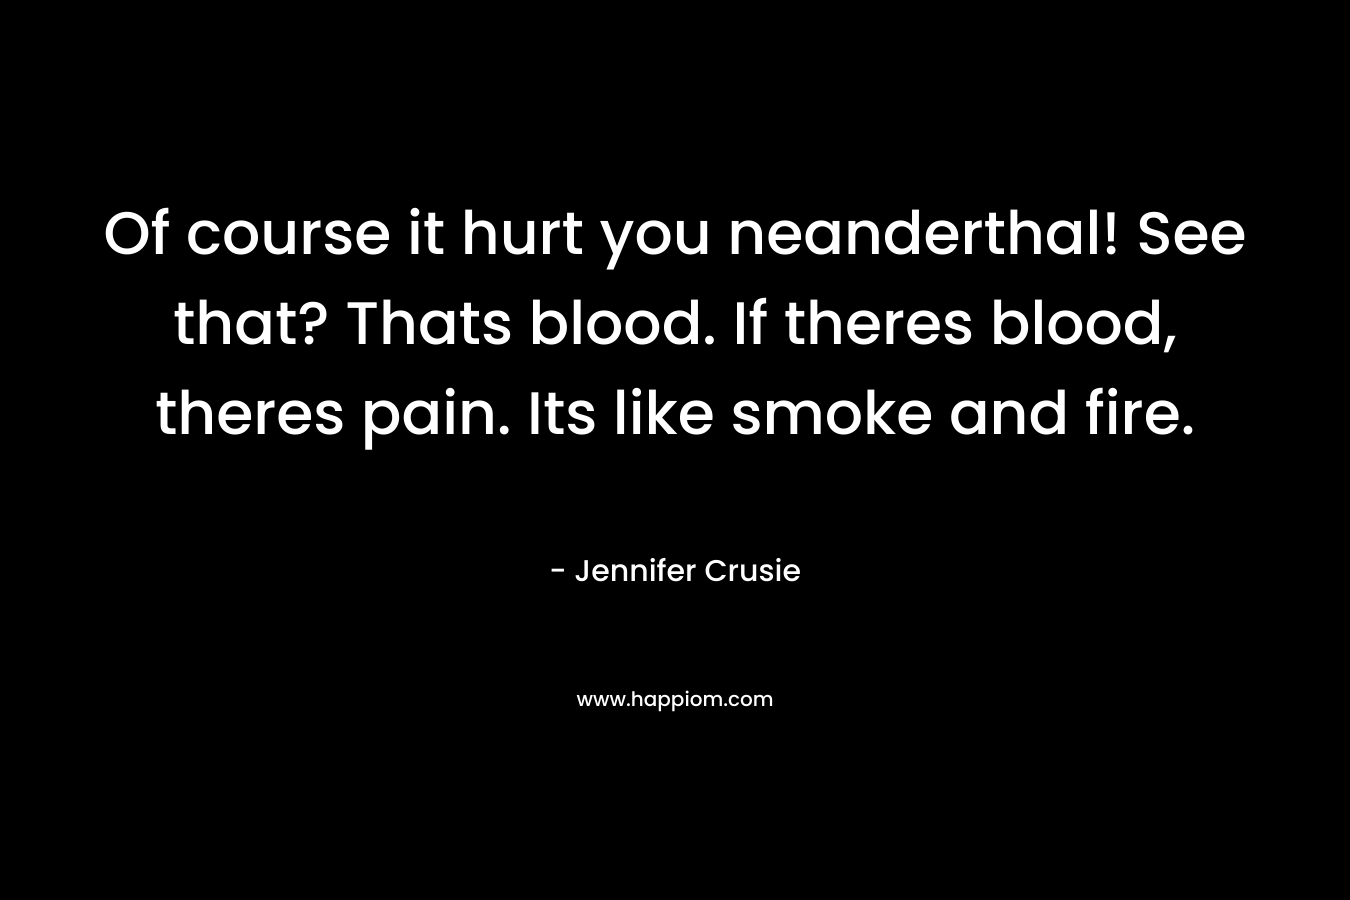 Of course it hurt you neanderthal! See that? Thats blood. If theres blood, theres pain. Its like smoke and fire.